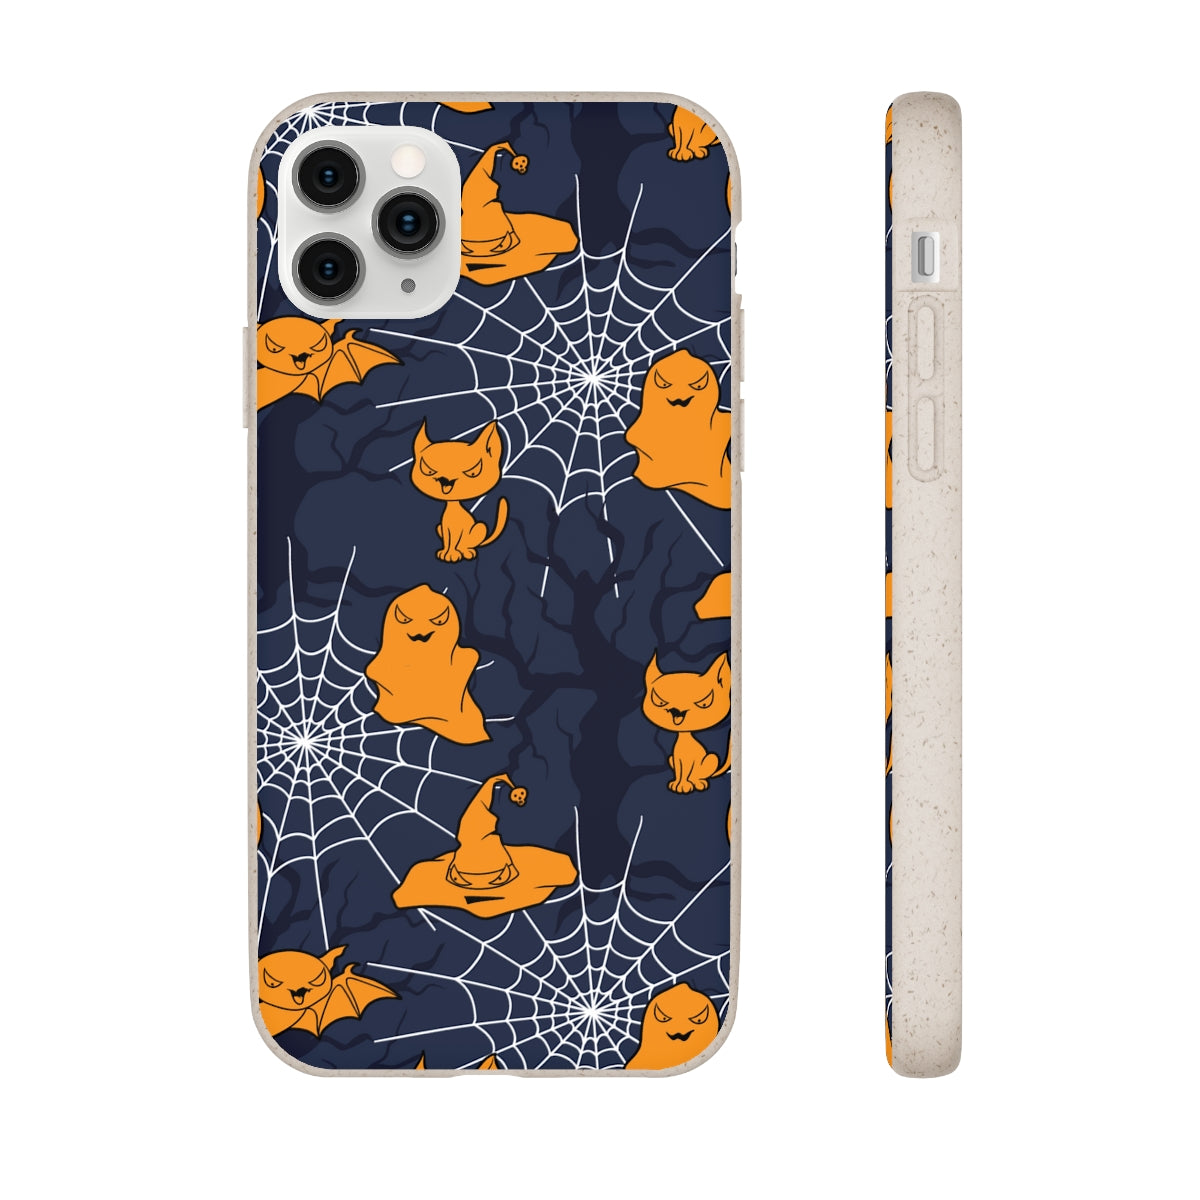 Ghostly Greetings Dark Night | Plant-Based Biodegradable Phone Case